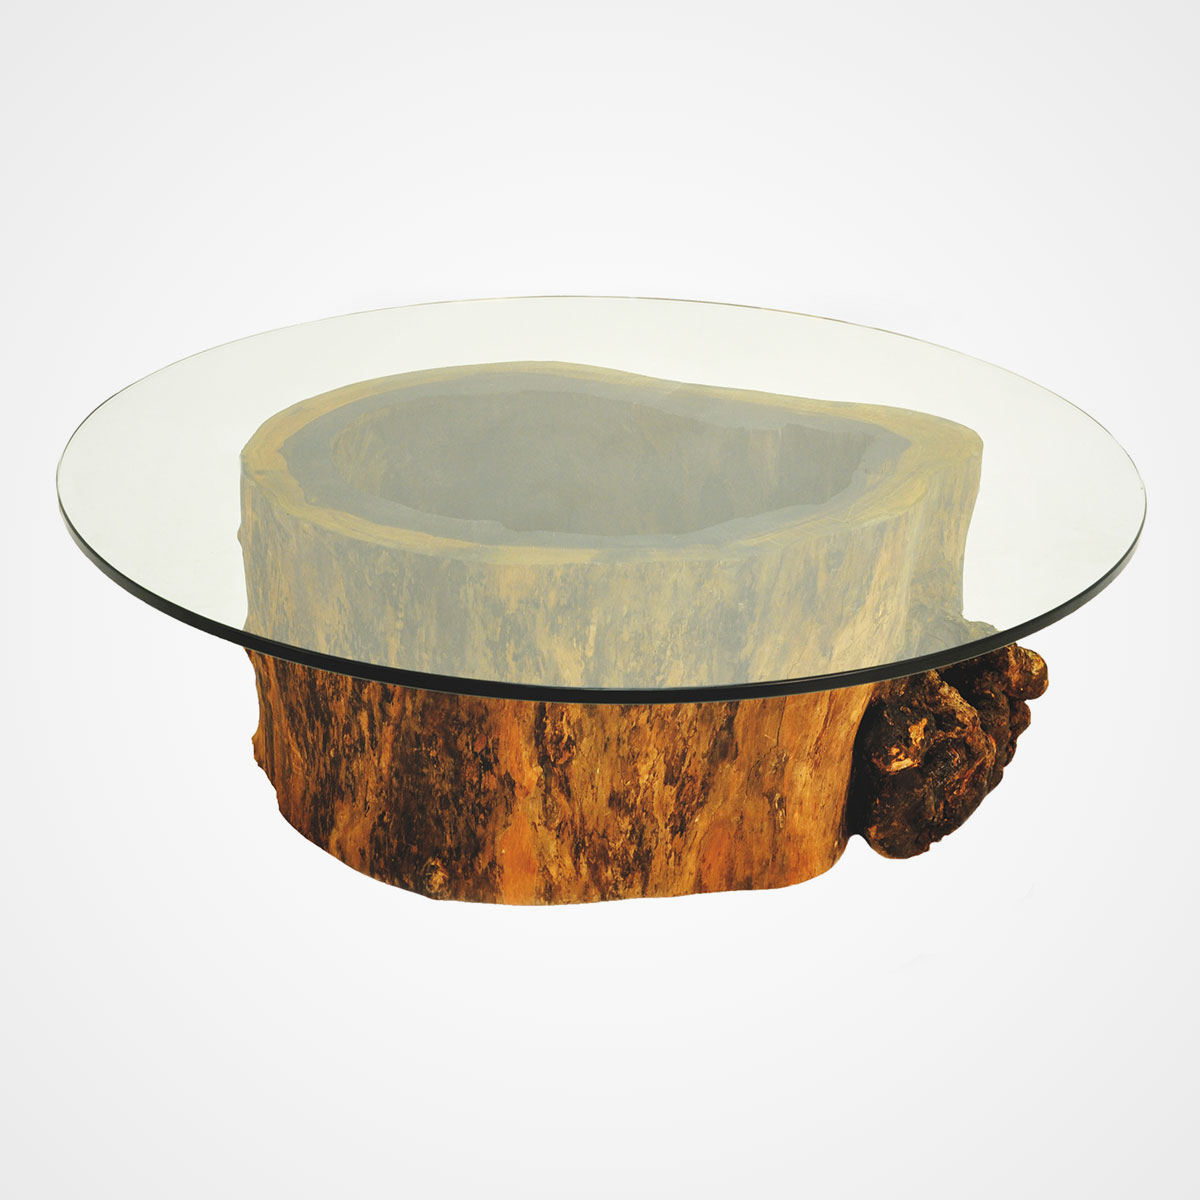 Coffee Table Round Glass Top Coffee Table Round Glass Top Coffee Table. Round Glass Top Coffee Table With Wood Base. Round Glass Top Coffee Table Canada.